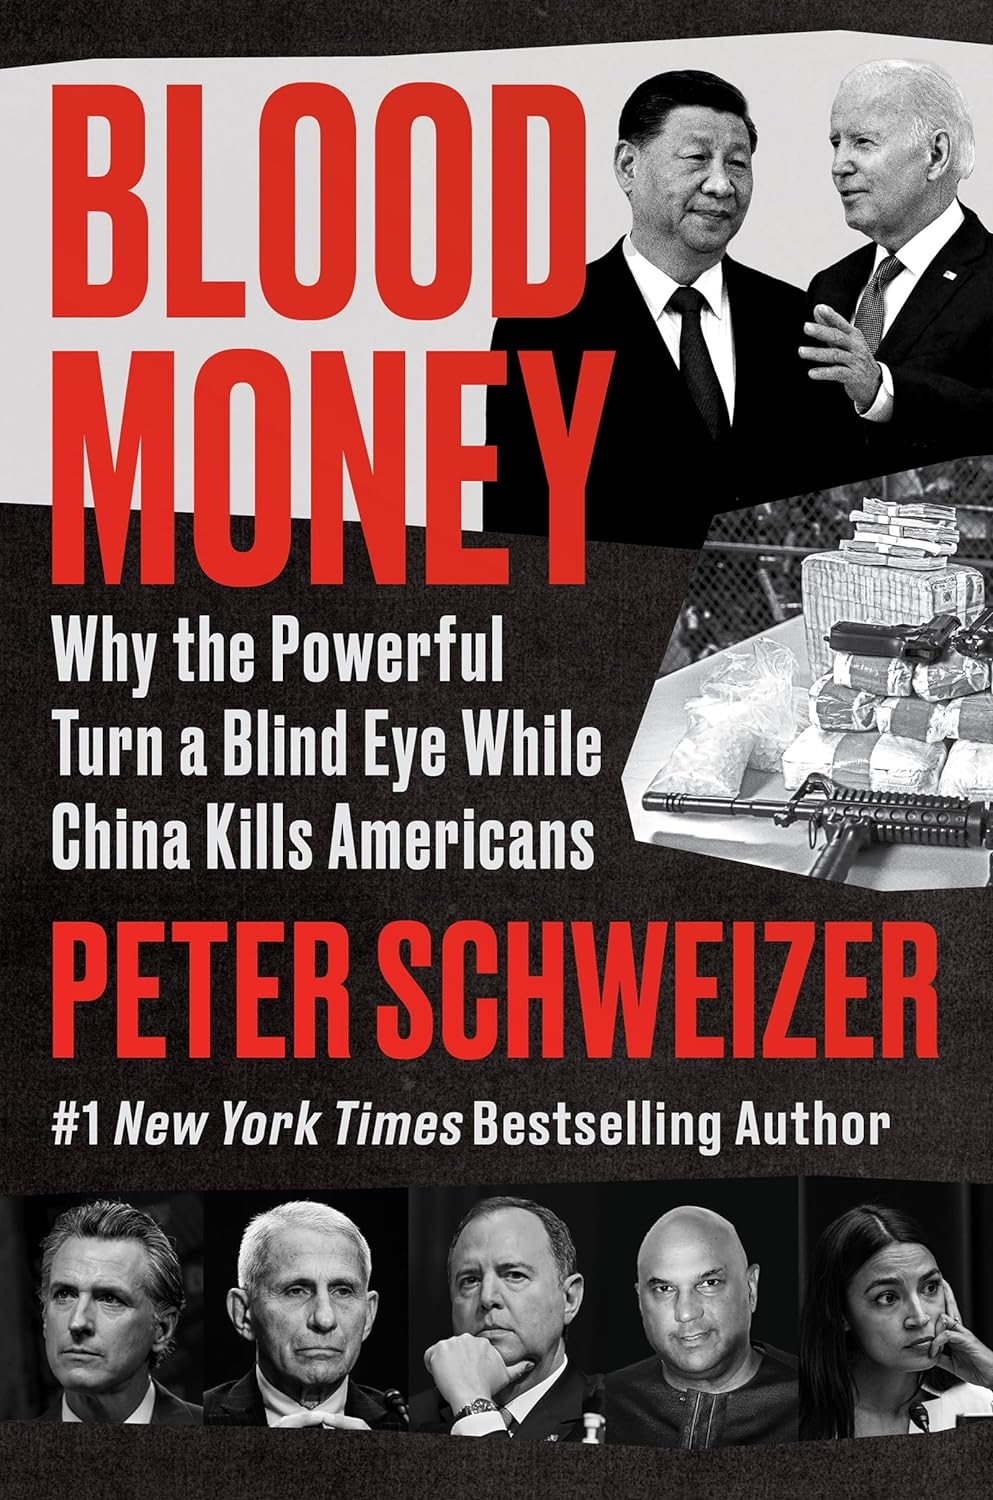 Blood Money: Why the Powerful Turn a Blind Eye While China Kills Americans   price checker   price checker Description Gallery